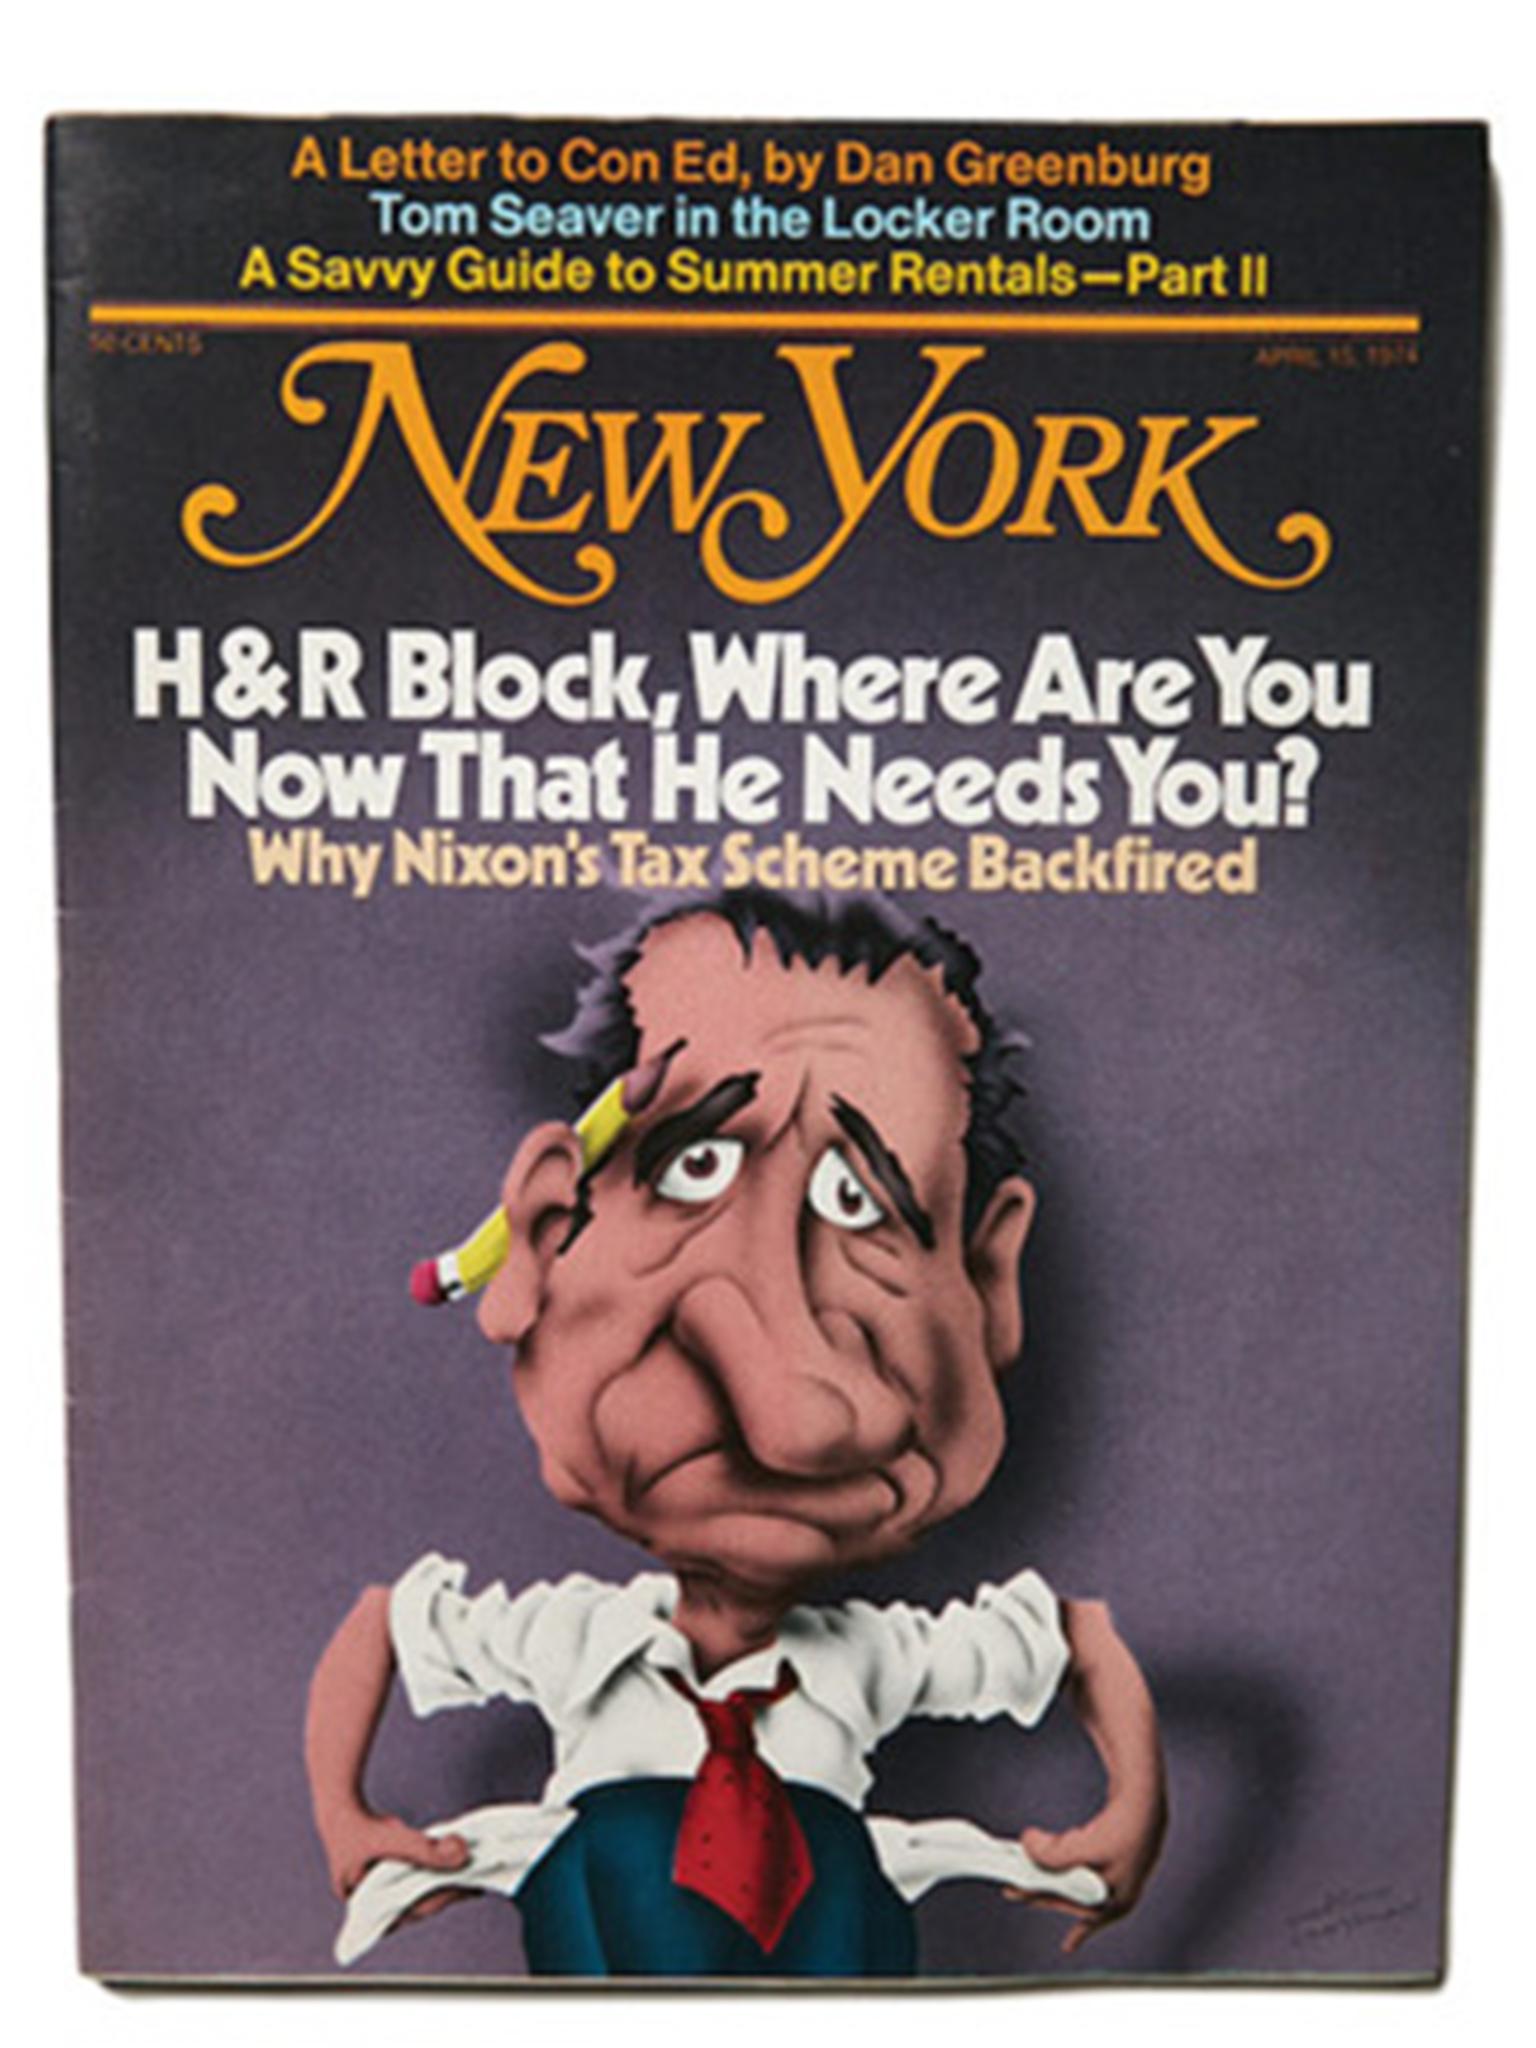 One of Grossman’s many takes on Nixon, on a 1974 cover of ‘New York’ magazine